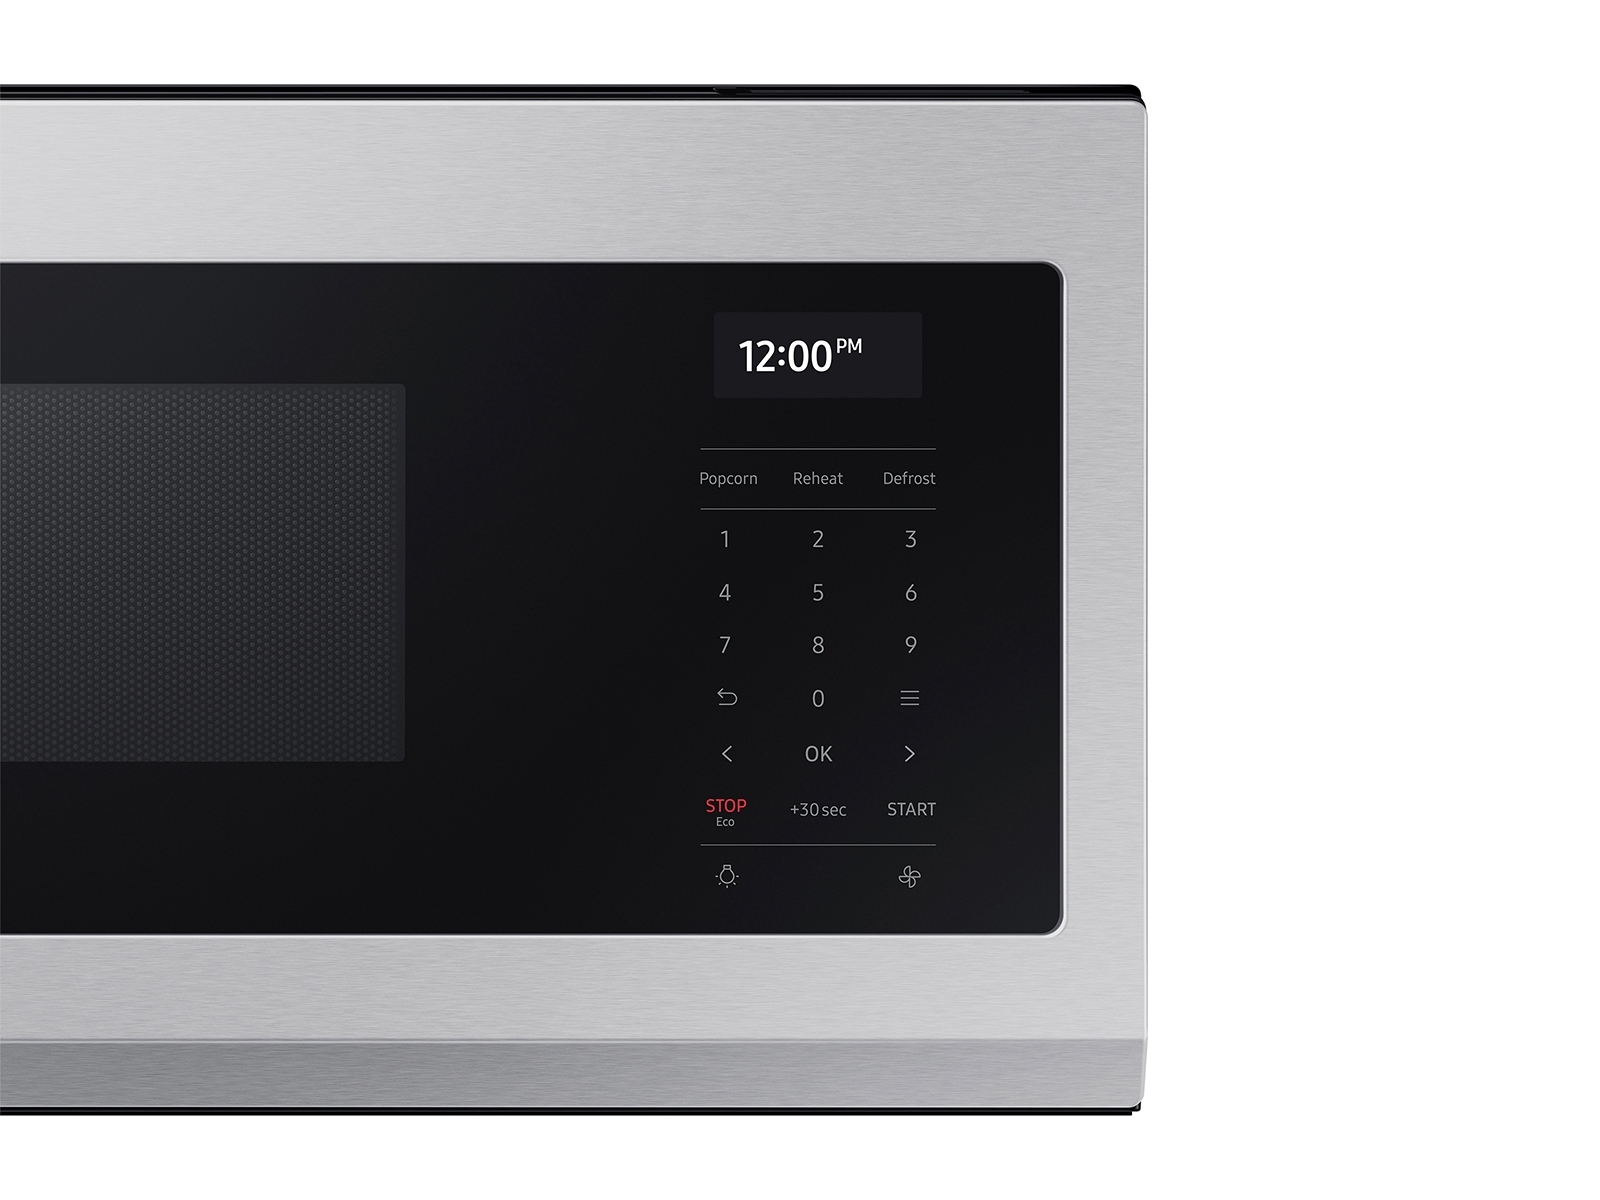 7 Cool And Stylish Microwaves That Are Also Functional